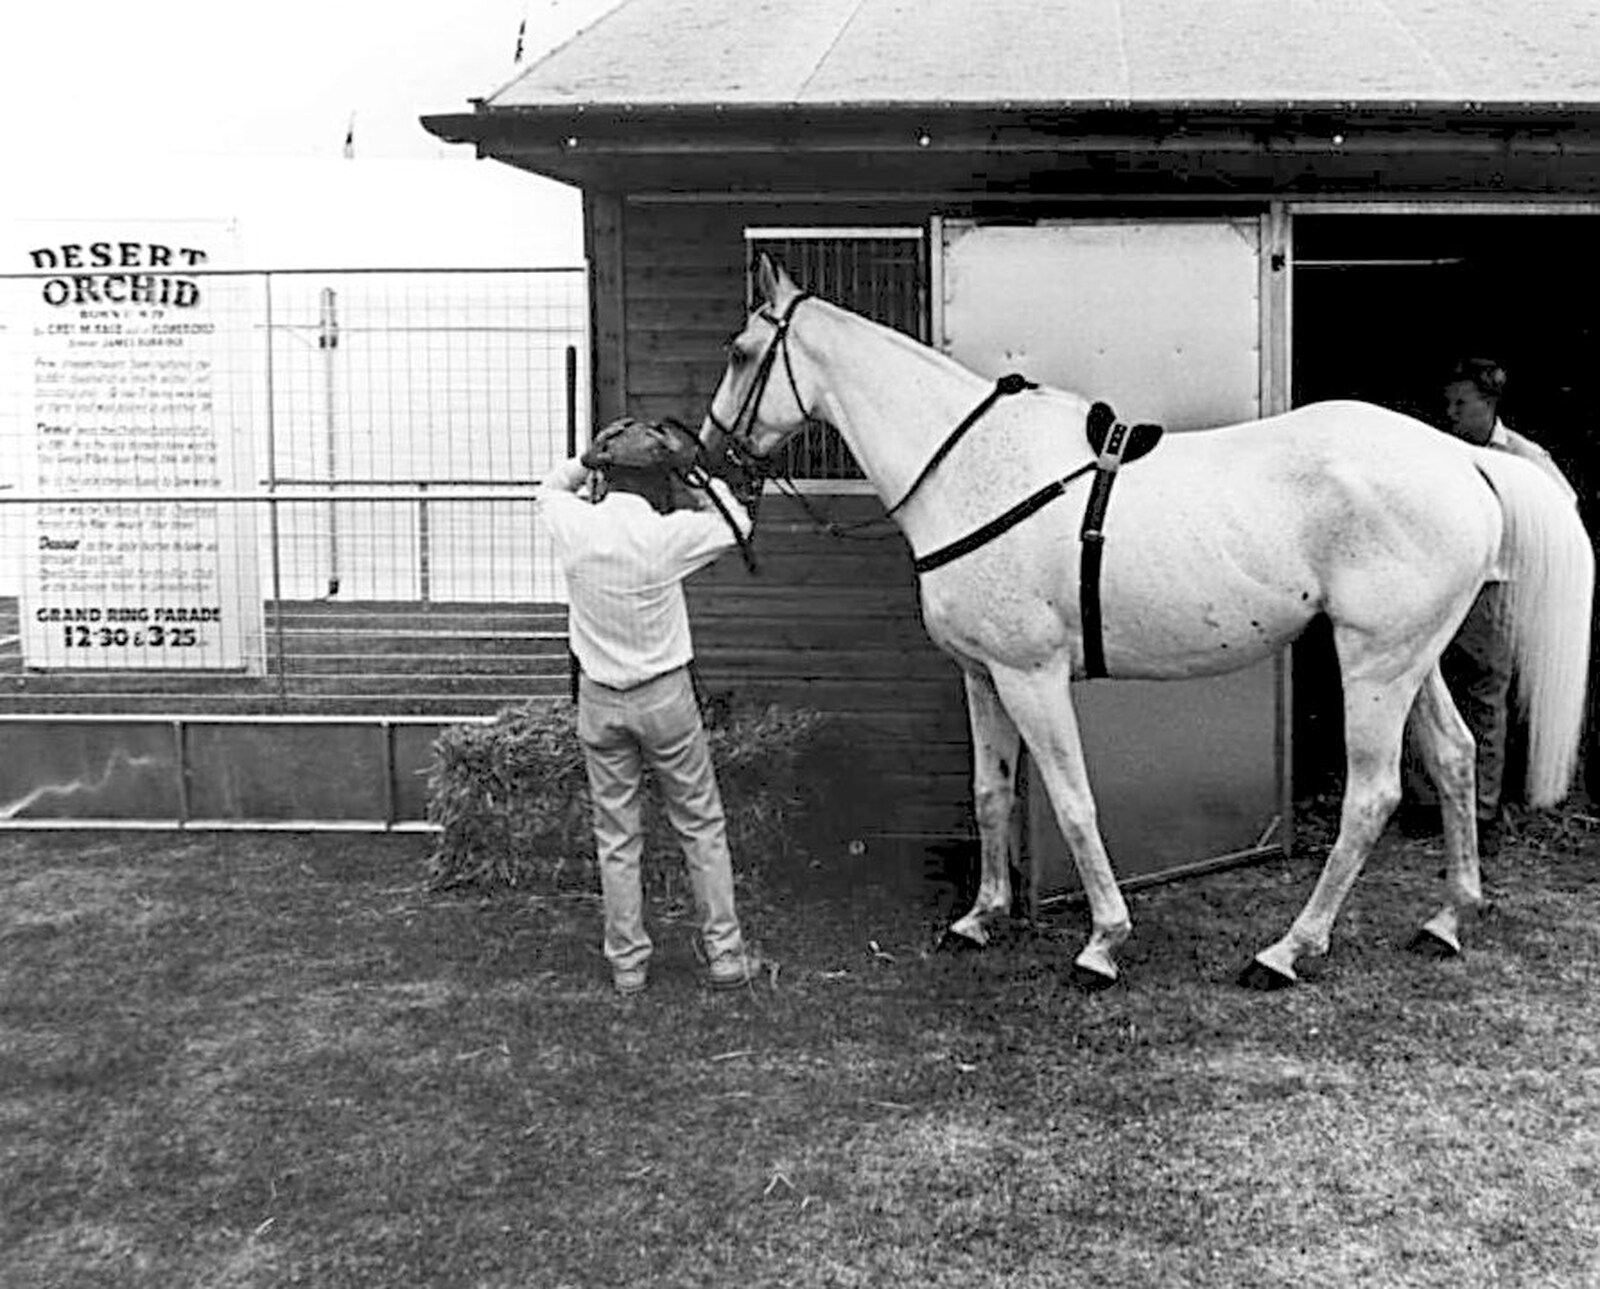 Famous racehorse Desert Orchid from The Royal Norfolk Show, Costessey Showground, Norwich - June 20th 1994